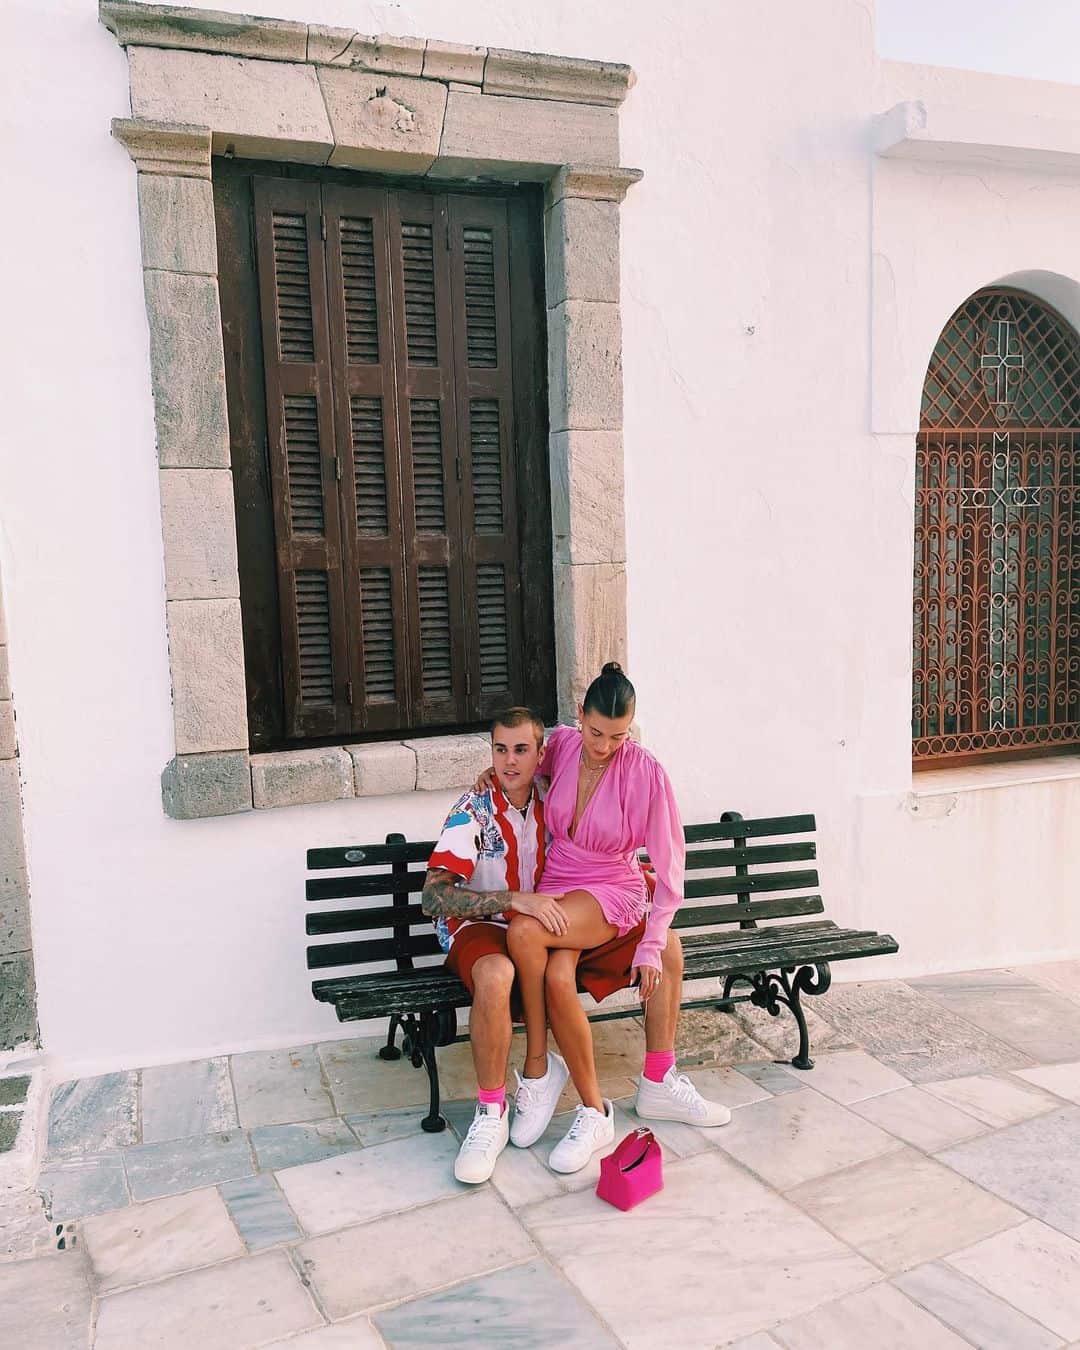  Justin Bieber and his wife Hailey getaway to Greece 